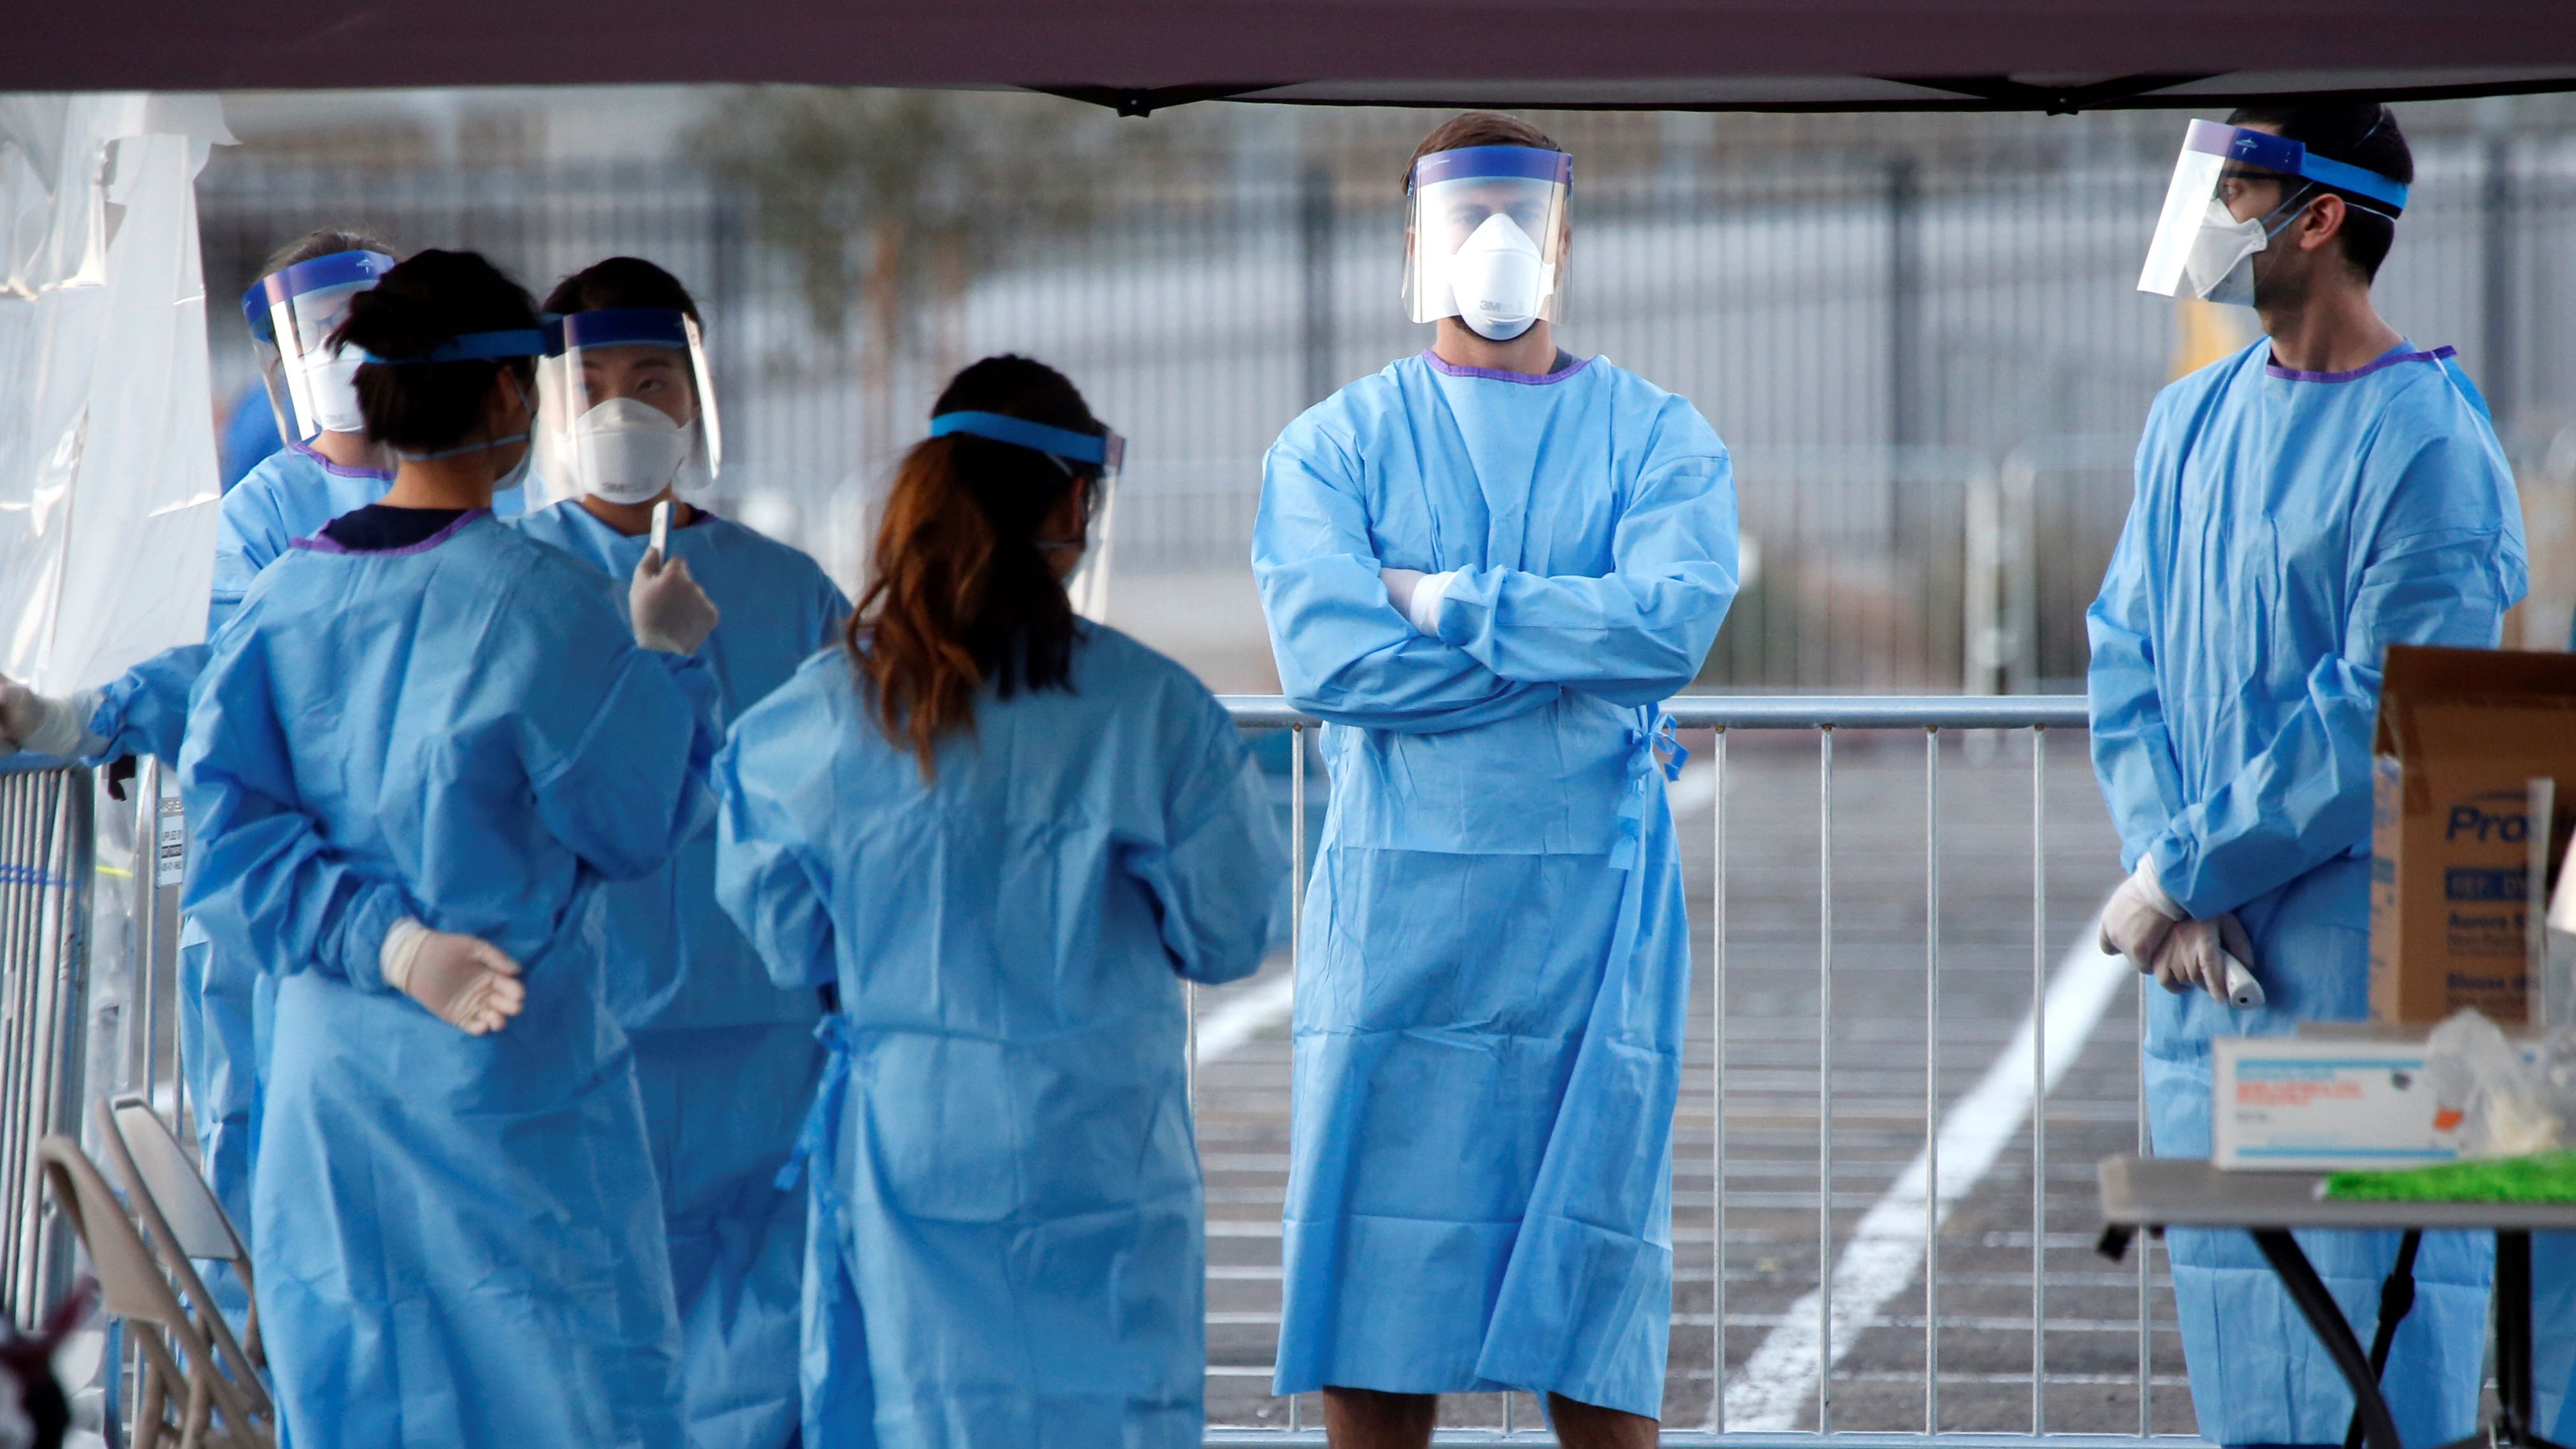 Medical students and physician assistants from Touro University Nevada wait to screen people in a temporary parking lot shelter at Cashman Center, with spaces marked for social distancing to help slow the spread of coronavirus disease (COVID-19) in Las Vegas, Nevada, U.S. March 30, 2020. REUTERS/Steve Marcus